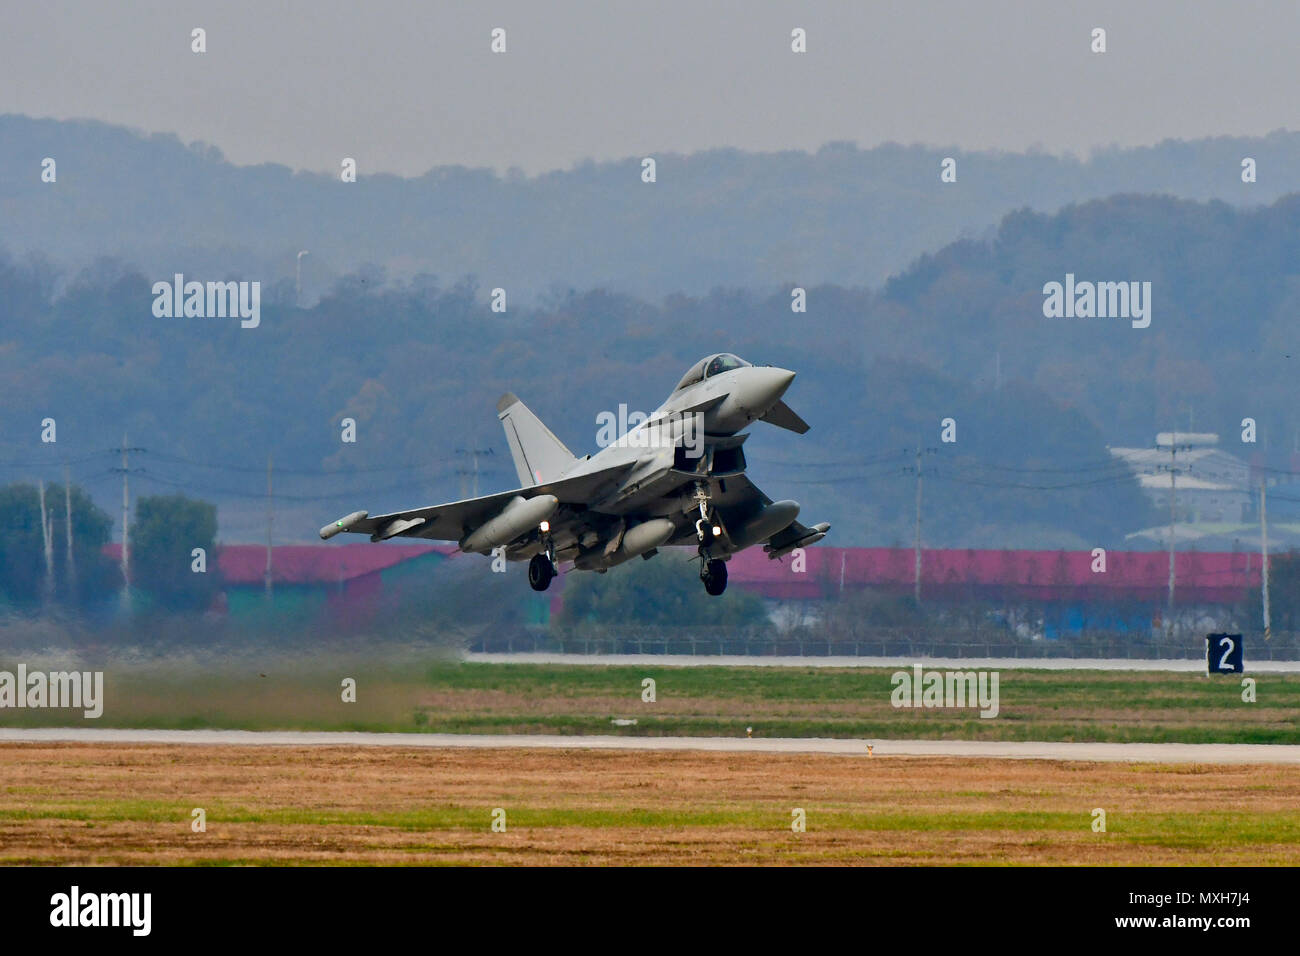 A Royal Air Force Eurofighter Typhoon FRG4 takes off at Osan Air Base, Republic of Korea, Nov. 7, 2016. The RAF deployed the largest number of assets on the Korean Peninsula since the Korean War during Invincible Shield, an interoperability exchange, from Nov. 1 – 10. (U.S. Air Force photo by Senior Airman Victor J. Caputo) Stock Photo